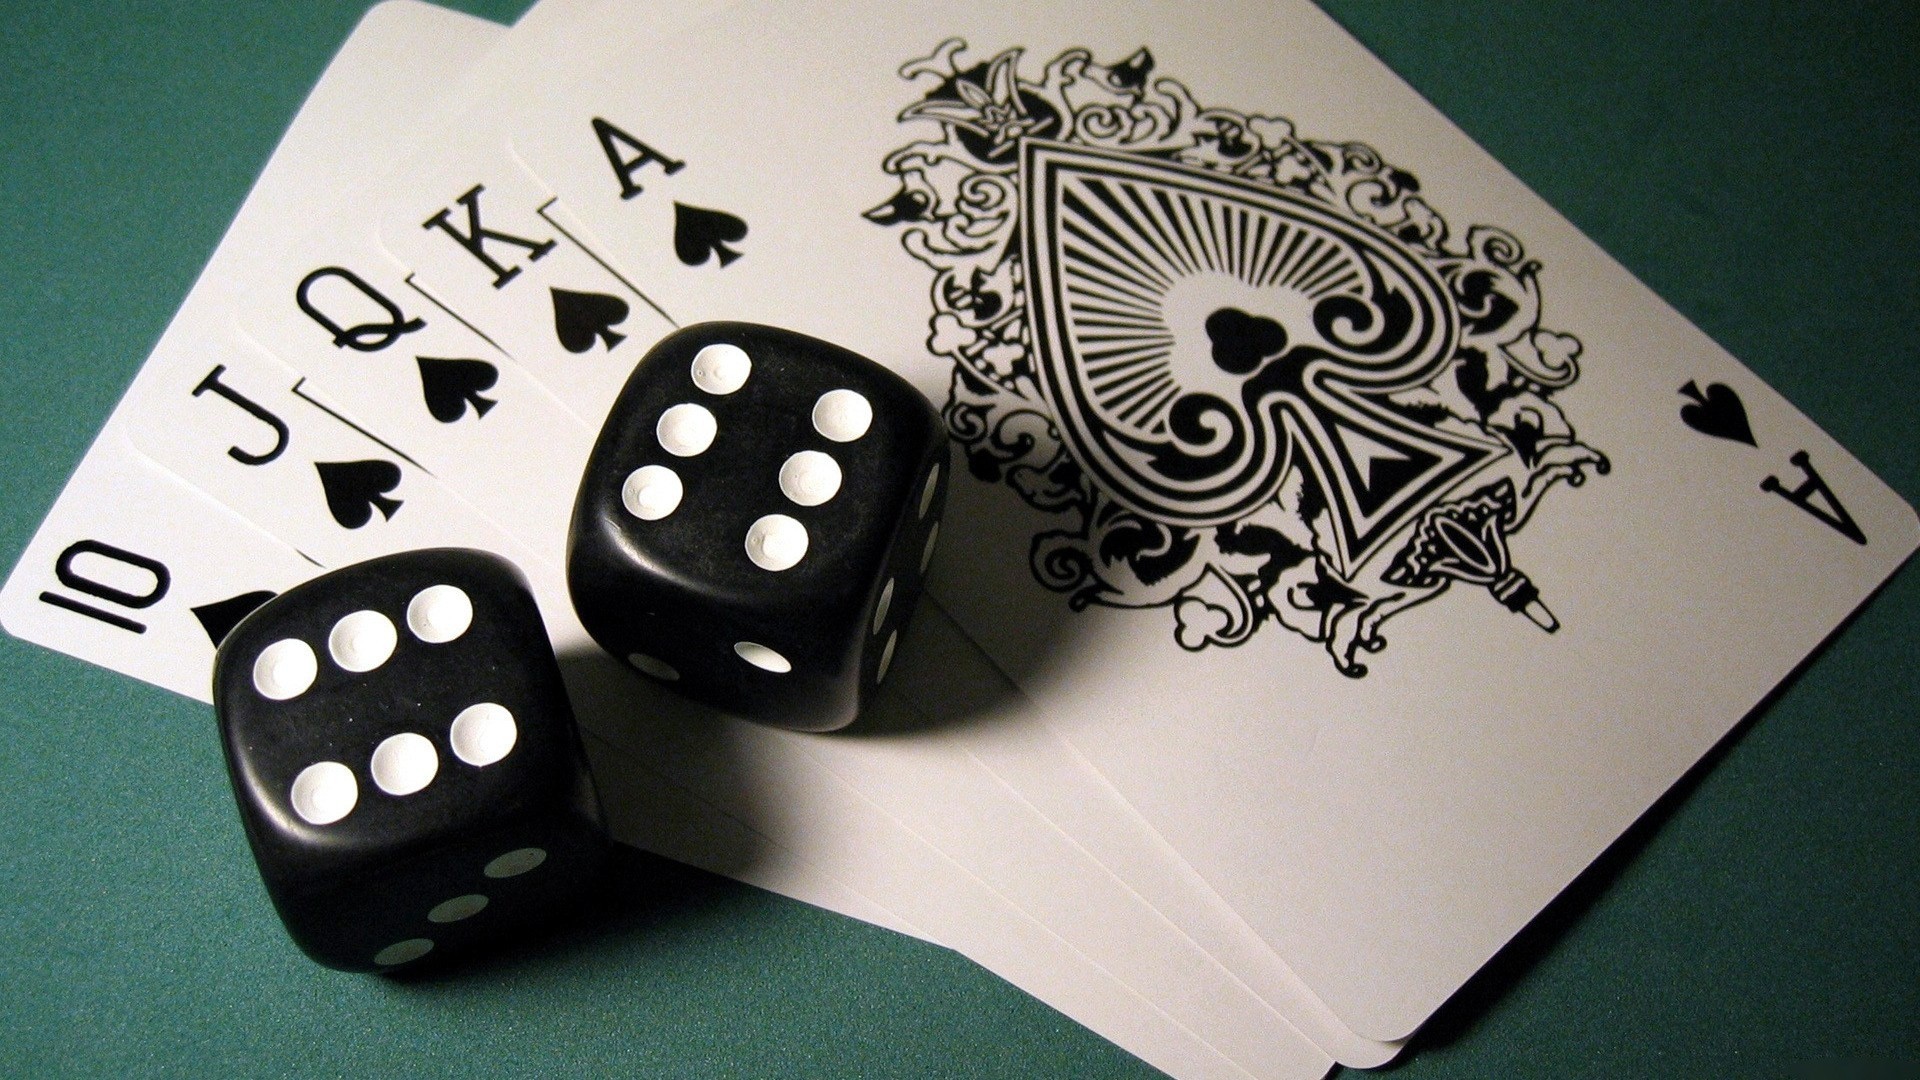 1920x1080 Love Playing Cards And Dice Wallpaper HD Wallpaper